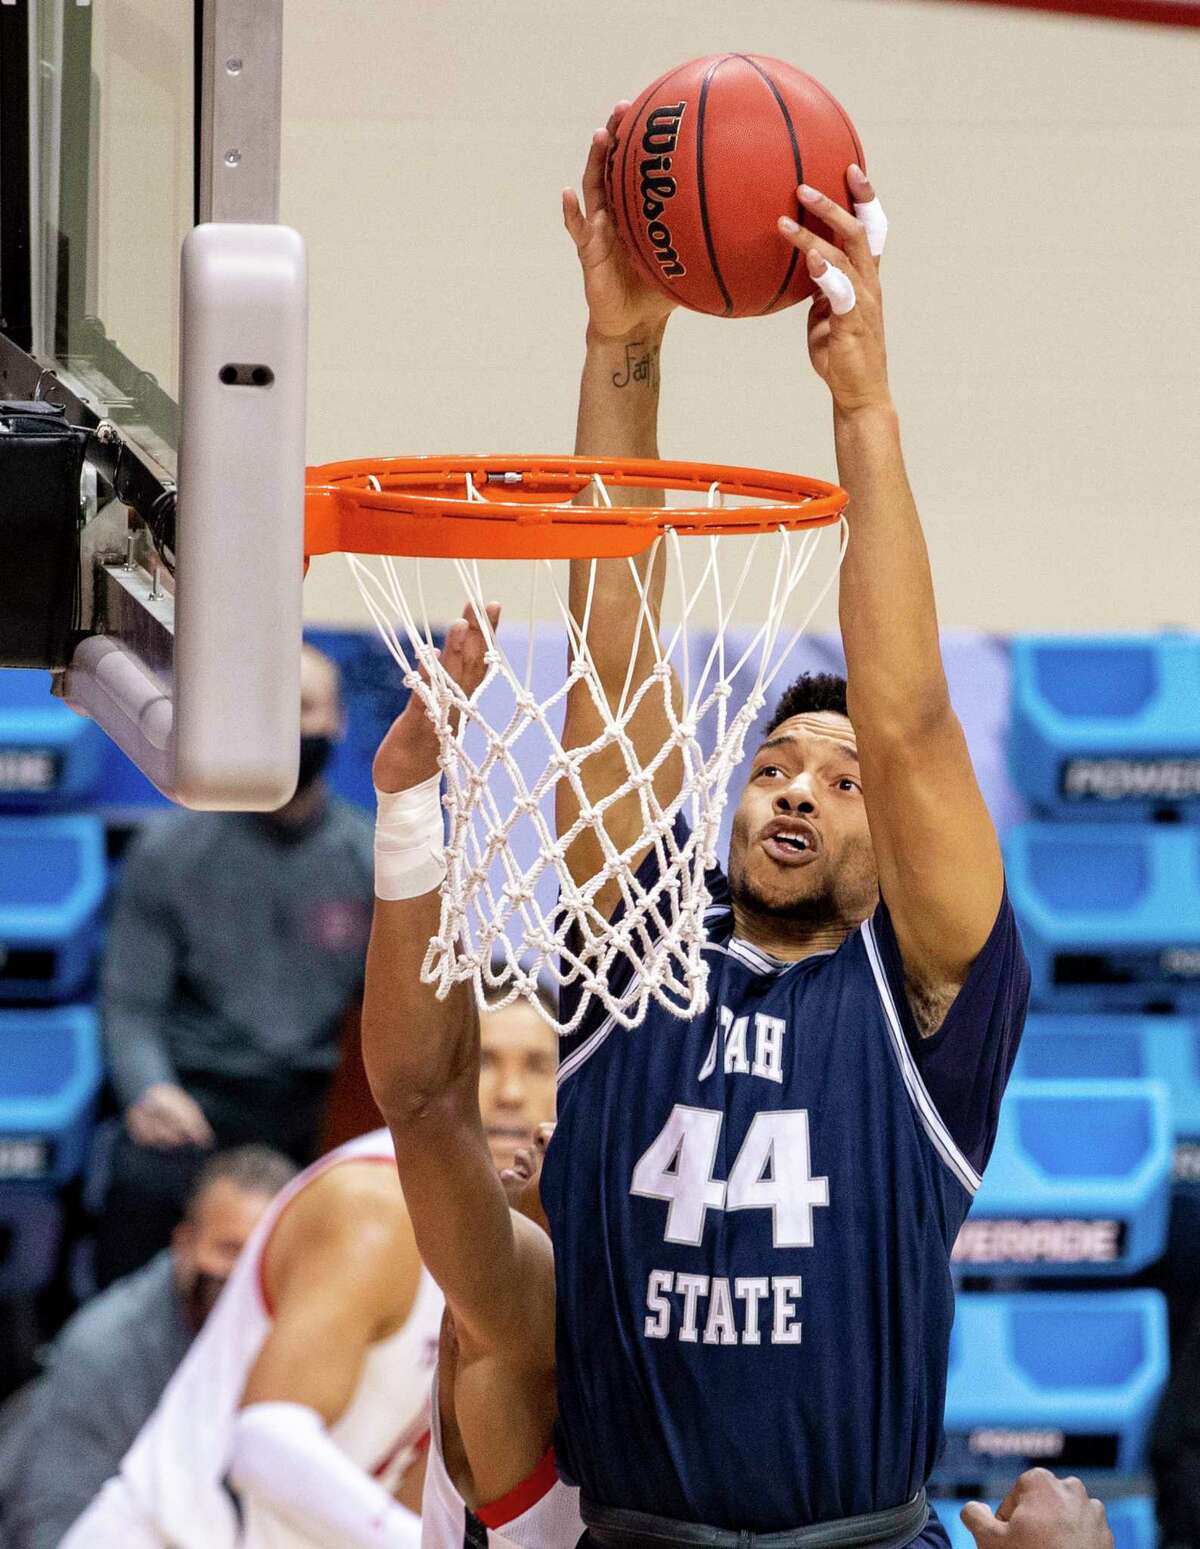 Utah State guard Marco Anthony (44) scores with a slam dunk during the first half of a first round game against Texas Tech in the NCAA men's college basketball tournament, Friday, March 19, 2021, in Bloomington, Ind. (AP Photo/Doug McSchooler)